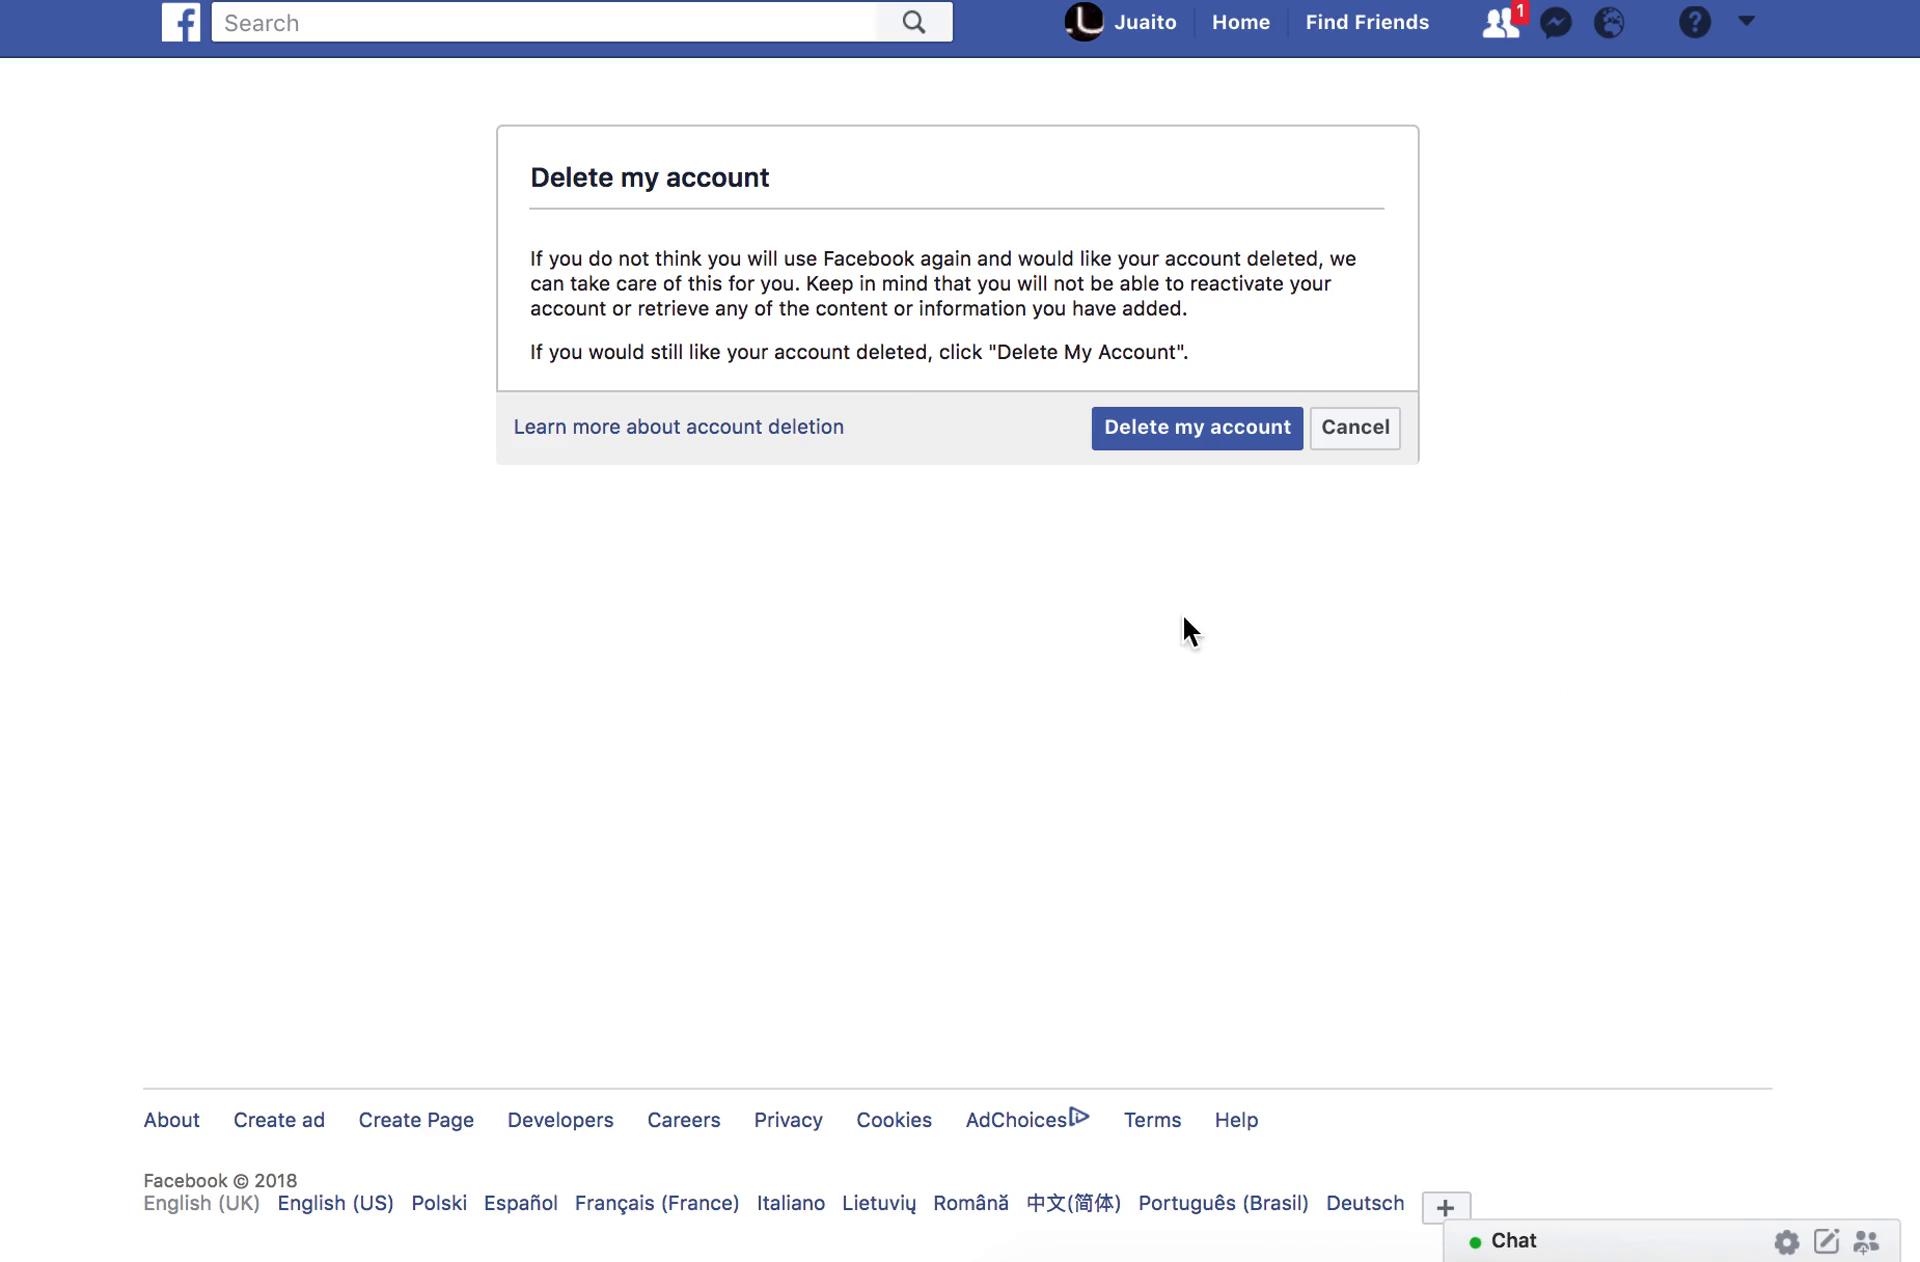 Facebook's account deletion page